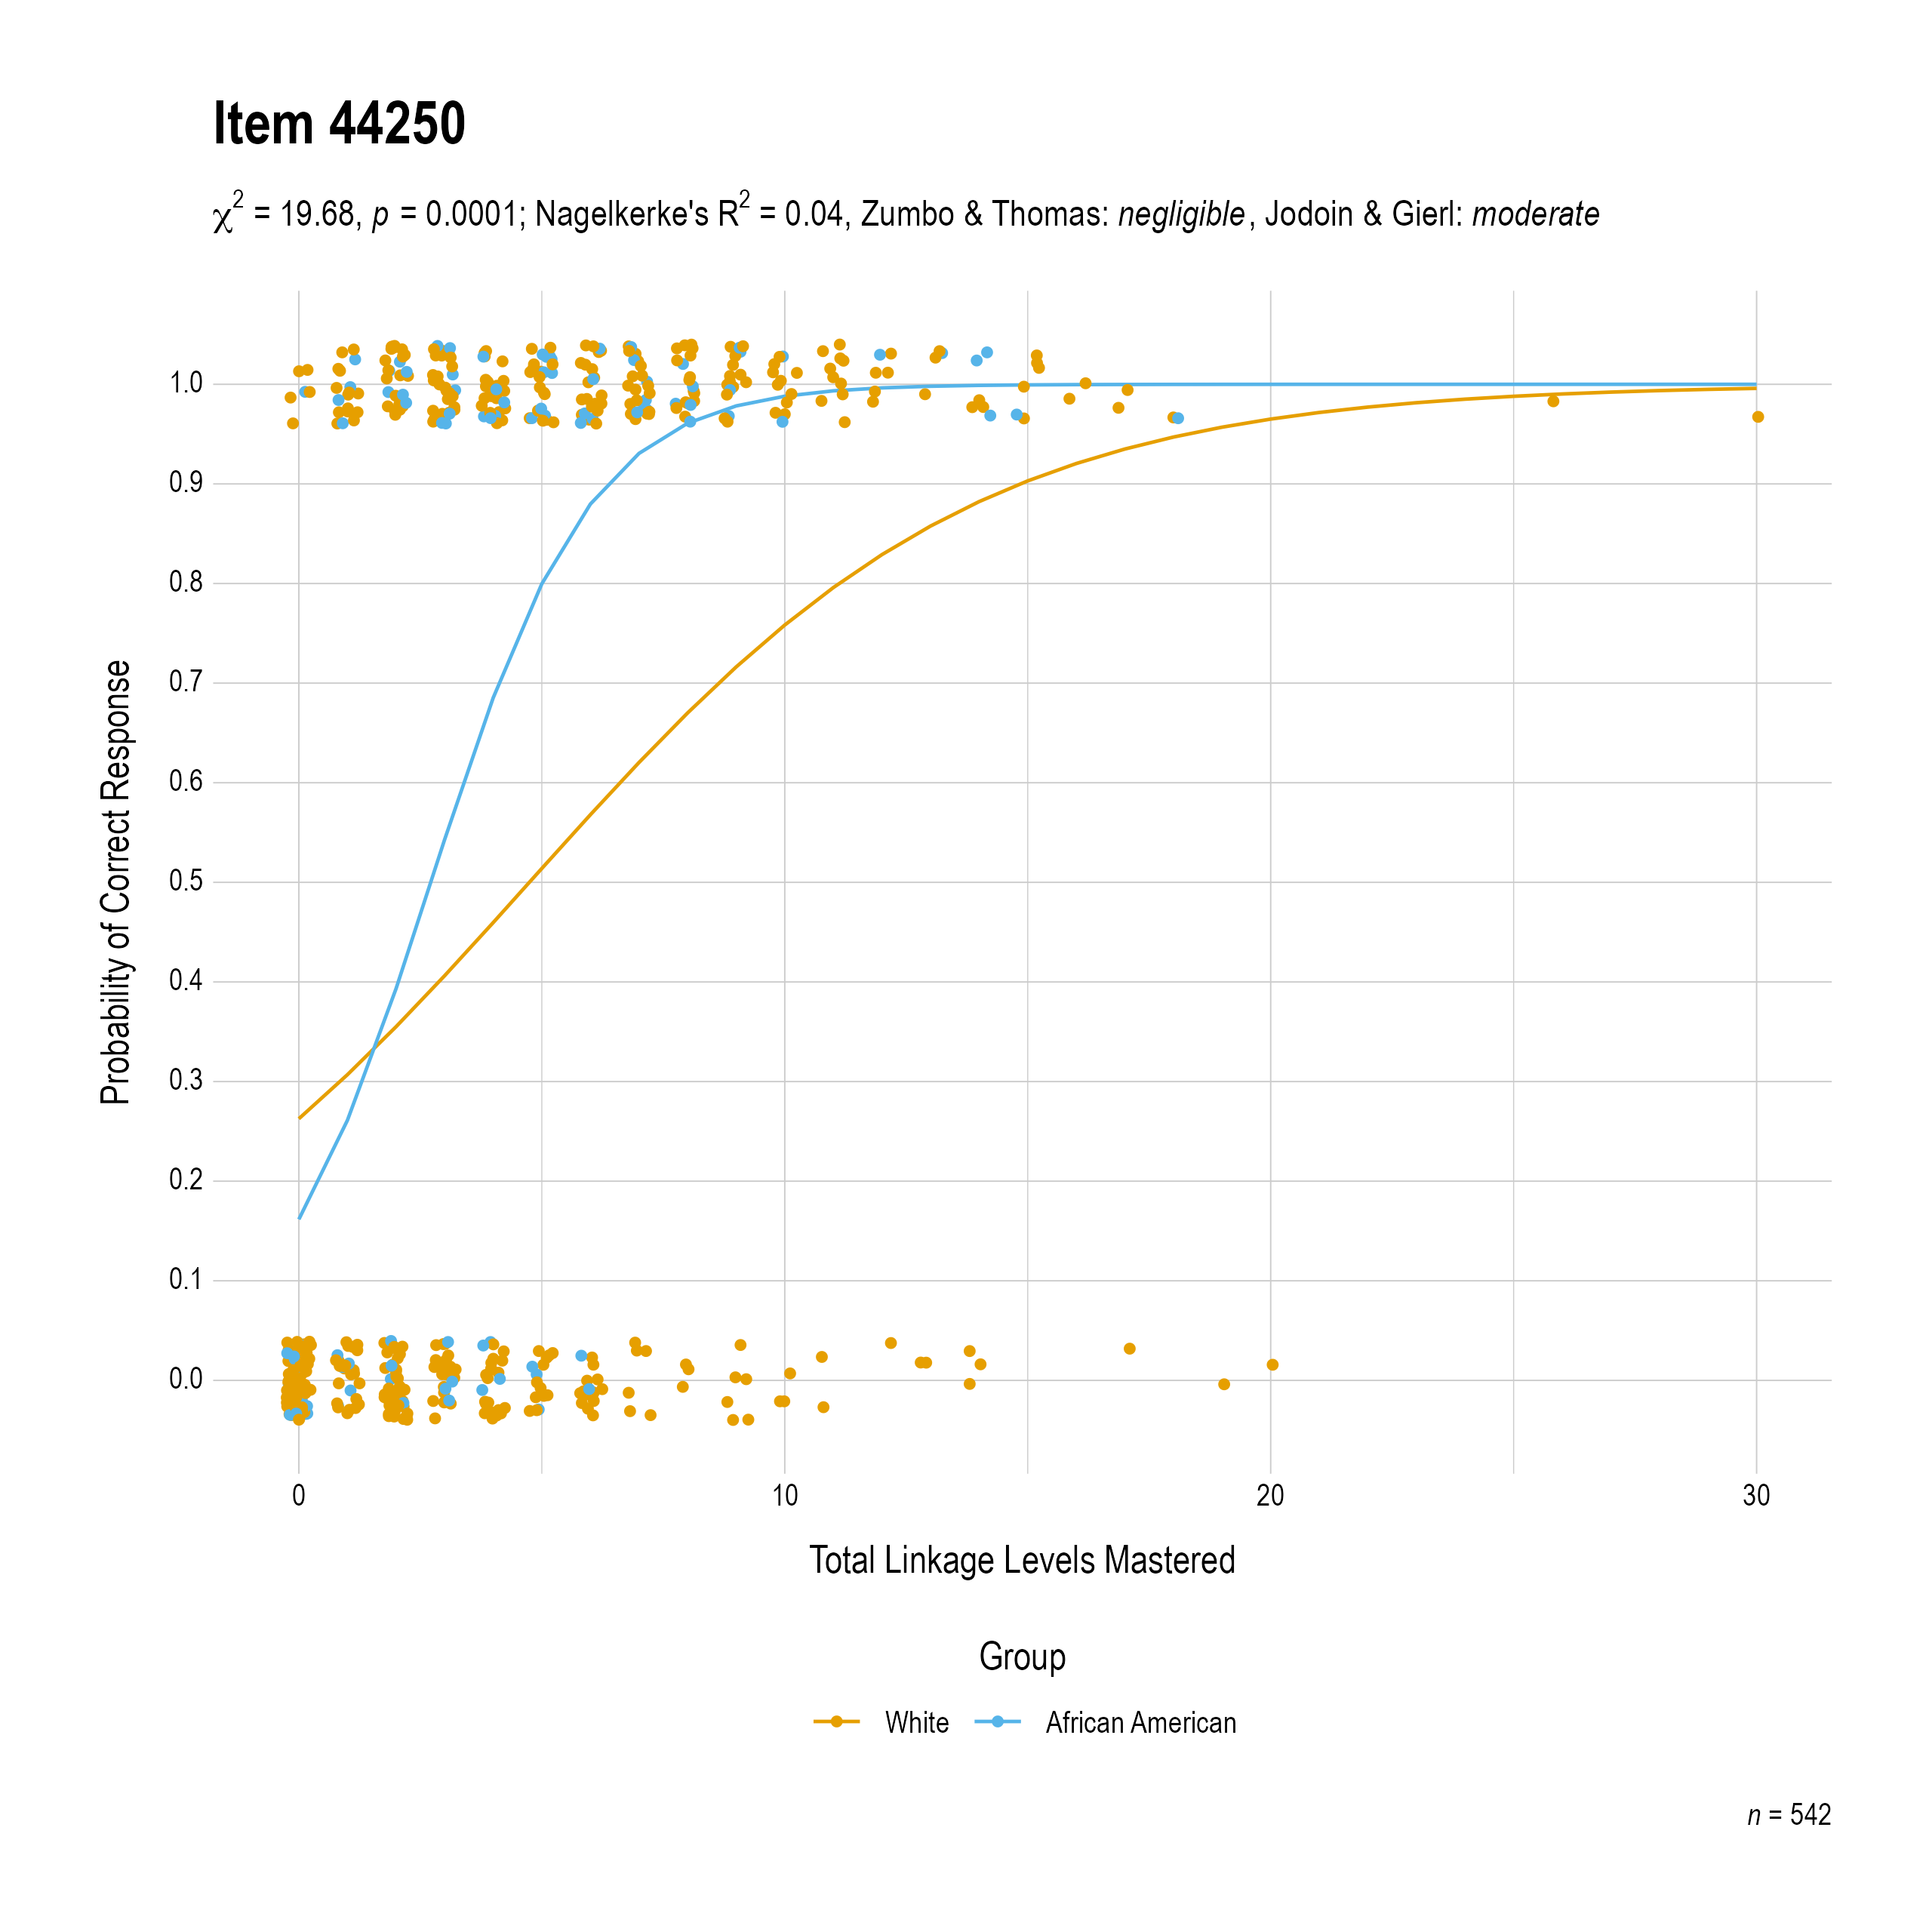 The plot of the combined race differential item function evidence for Mathematics item 44250. The figure contains points shaded by group. The figure also contains a logistic regression curve for each group. The total linkage levels mastered in is on the x-axis, and the probability of a correct response is on the y-axis.